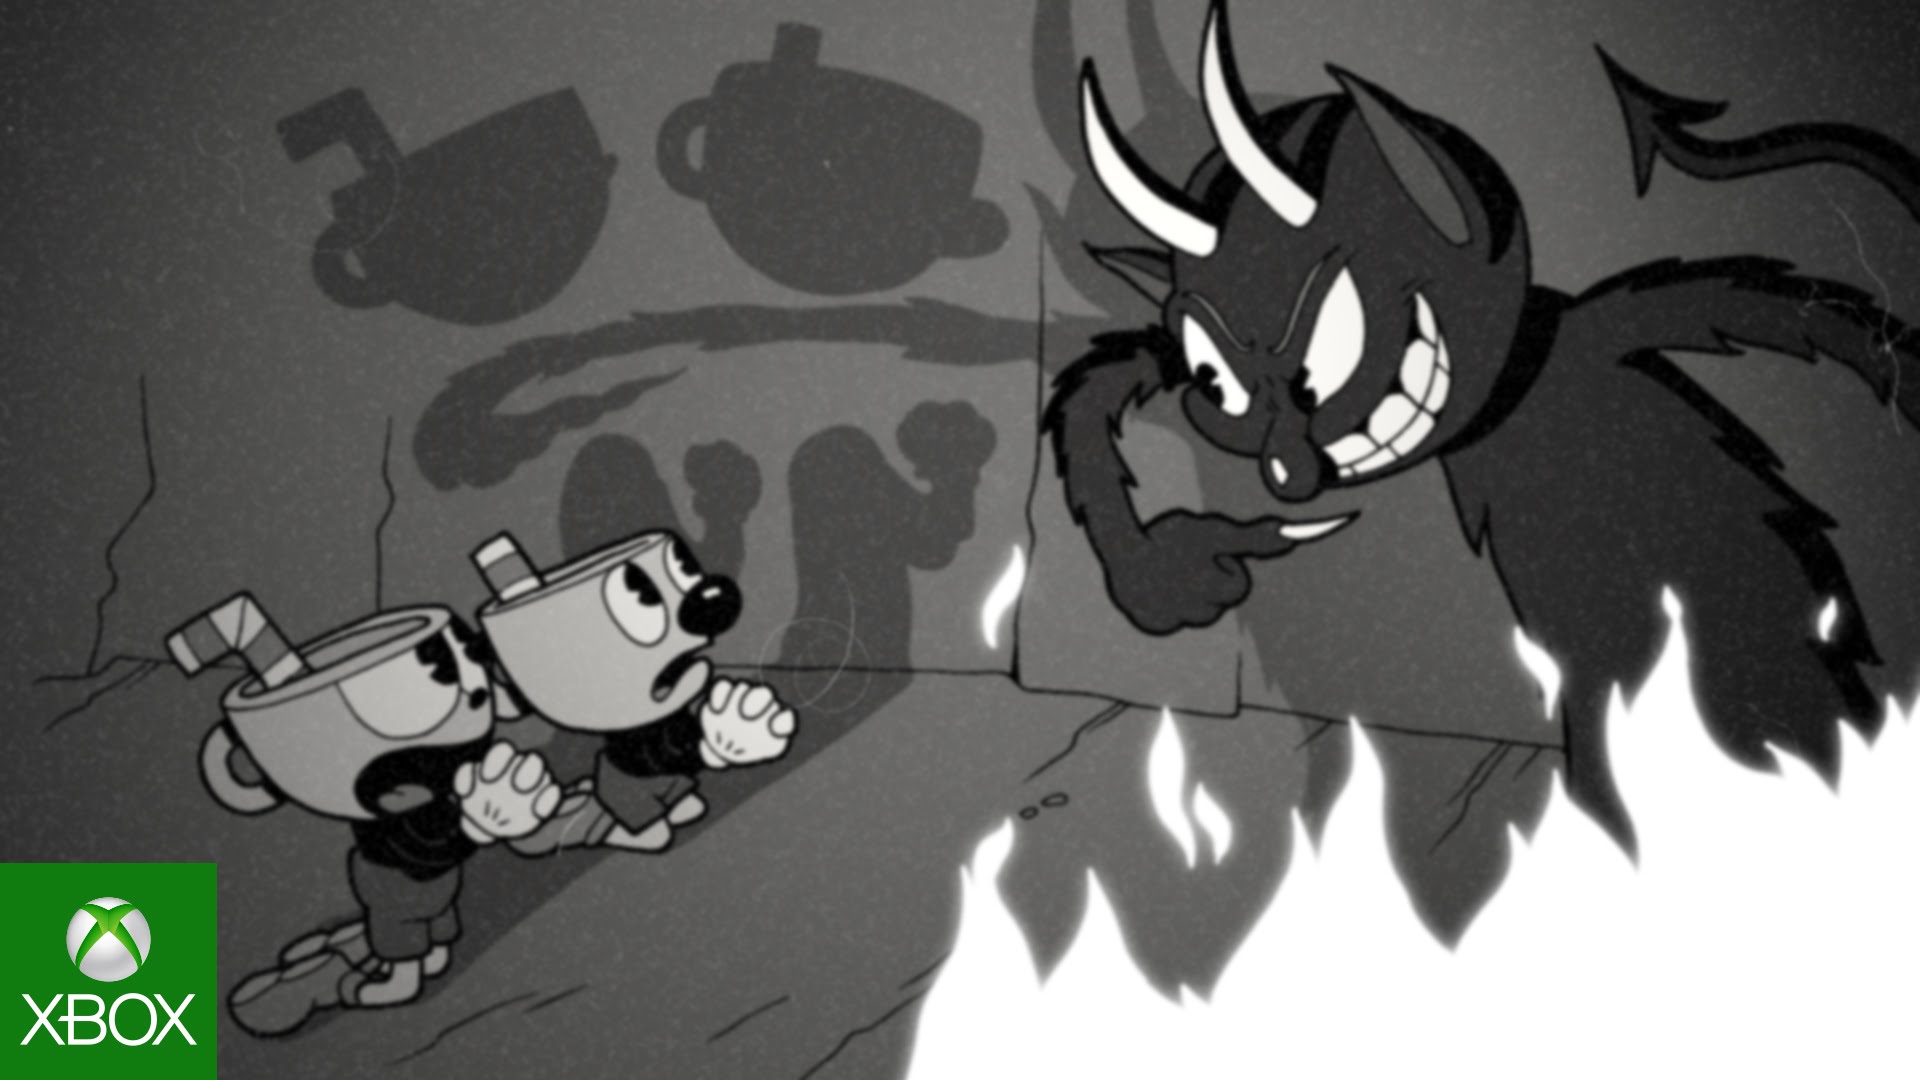 Cuphead - Video Game